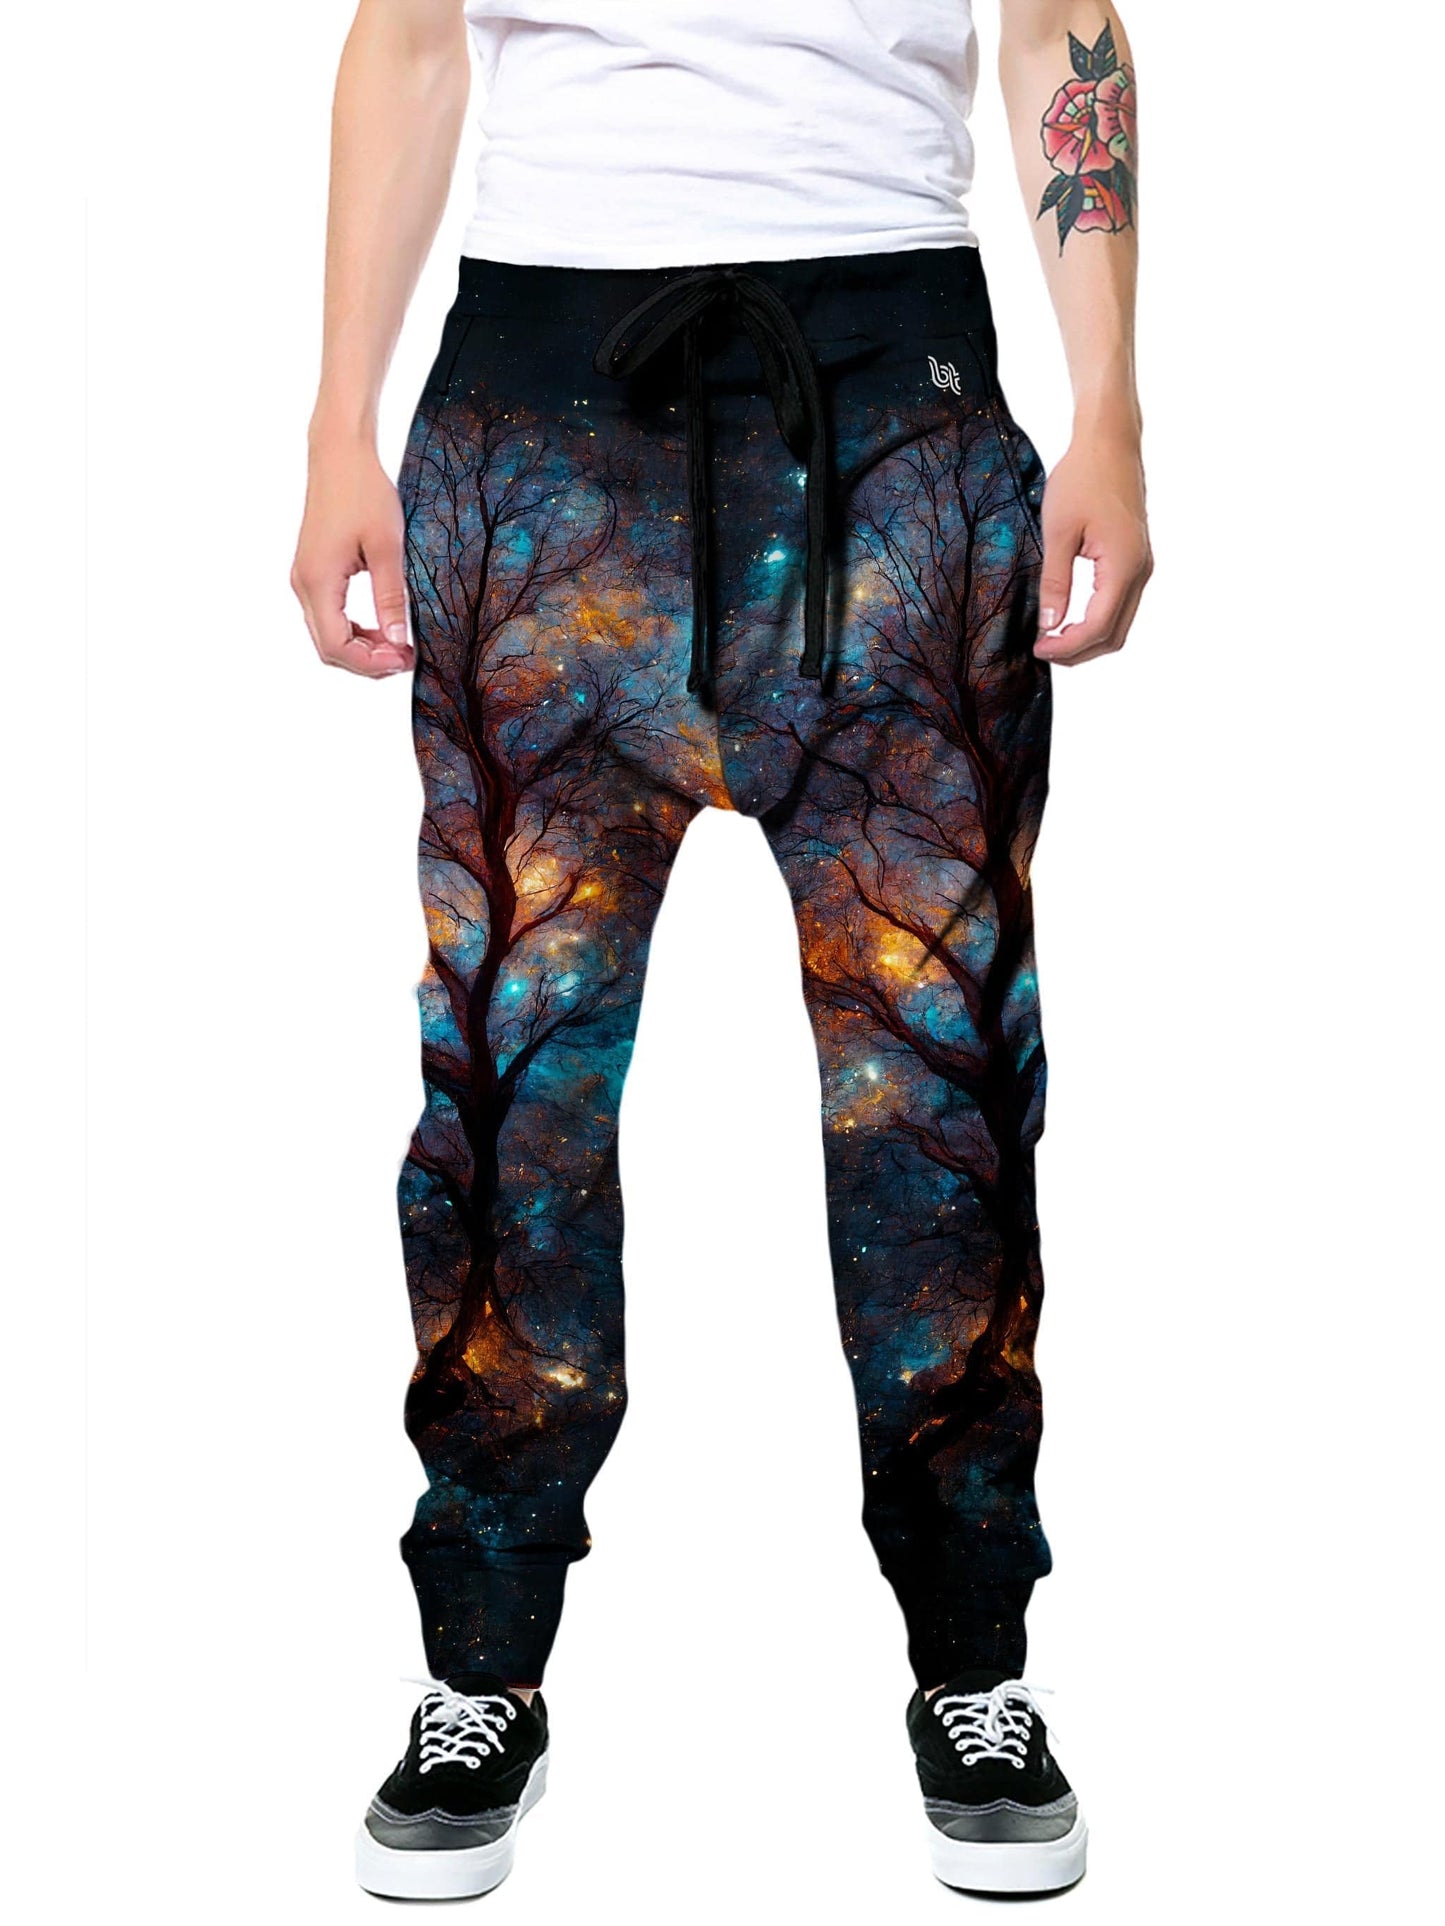 Internal Riddle Joggers, Gratefully Dyed, | iEDM